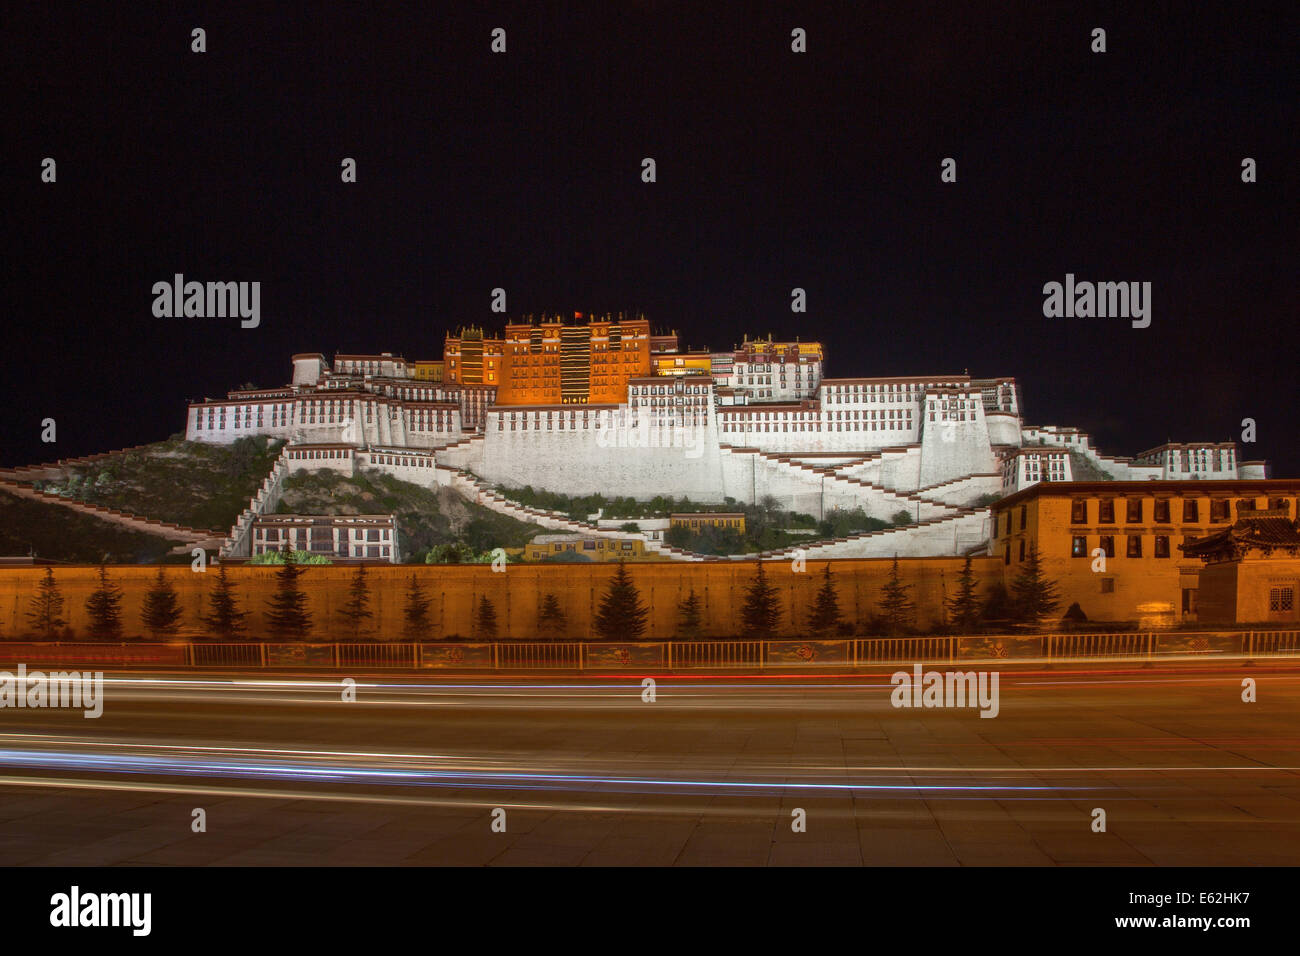 Night scene in front of the Potala Palace, Lhasa Stock Photo